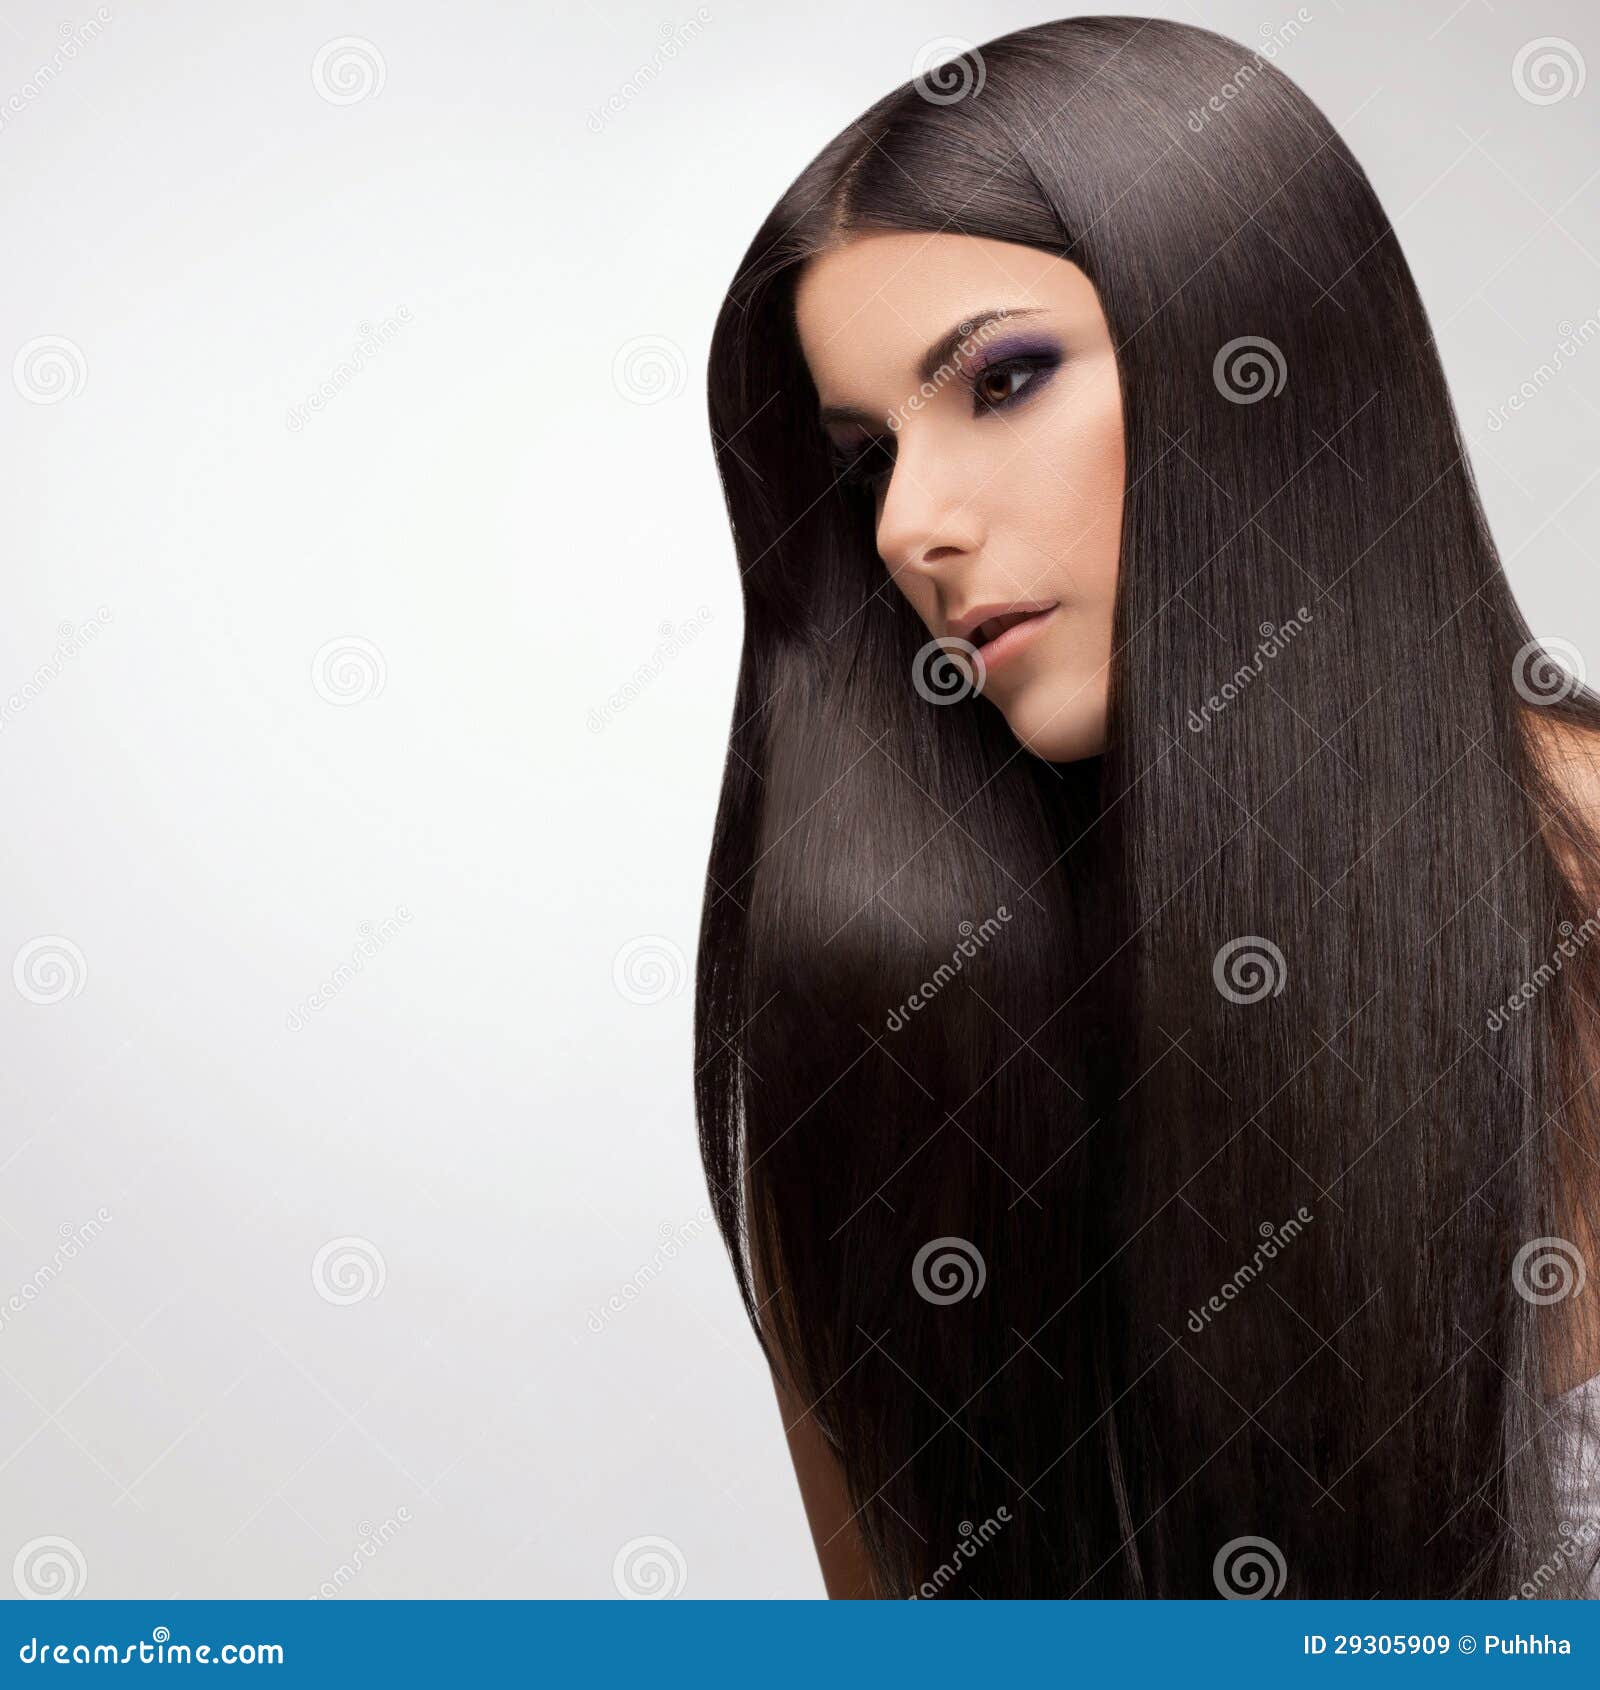 Woman with Healthy Long Hair Stock Image - Image of makeup, beautiful ...